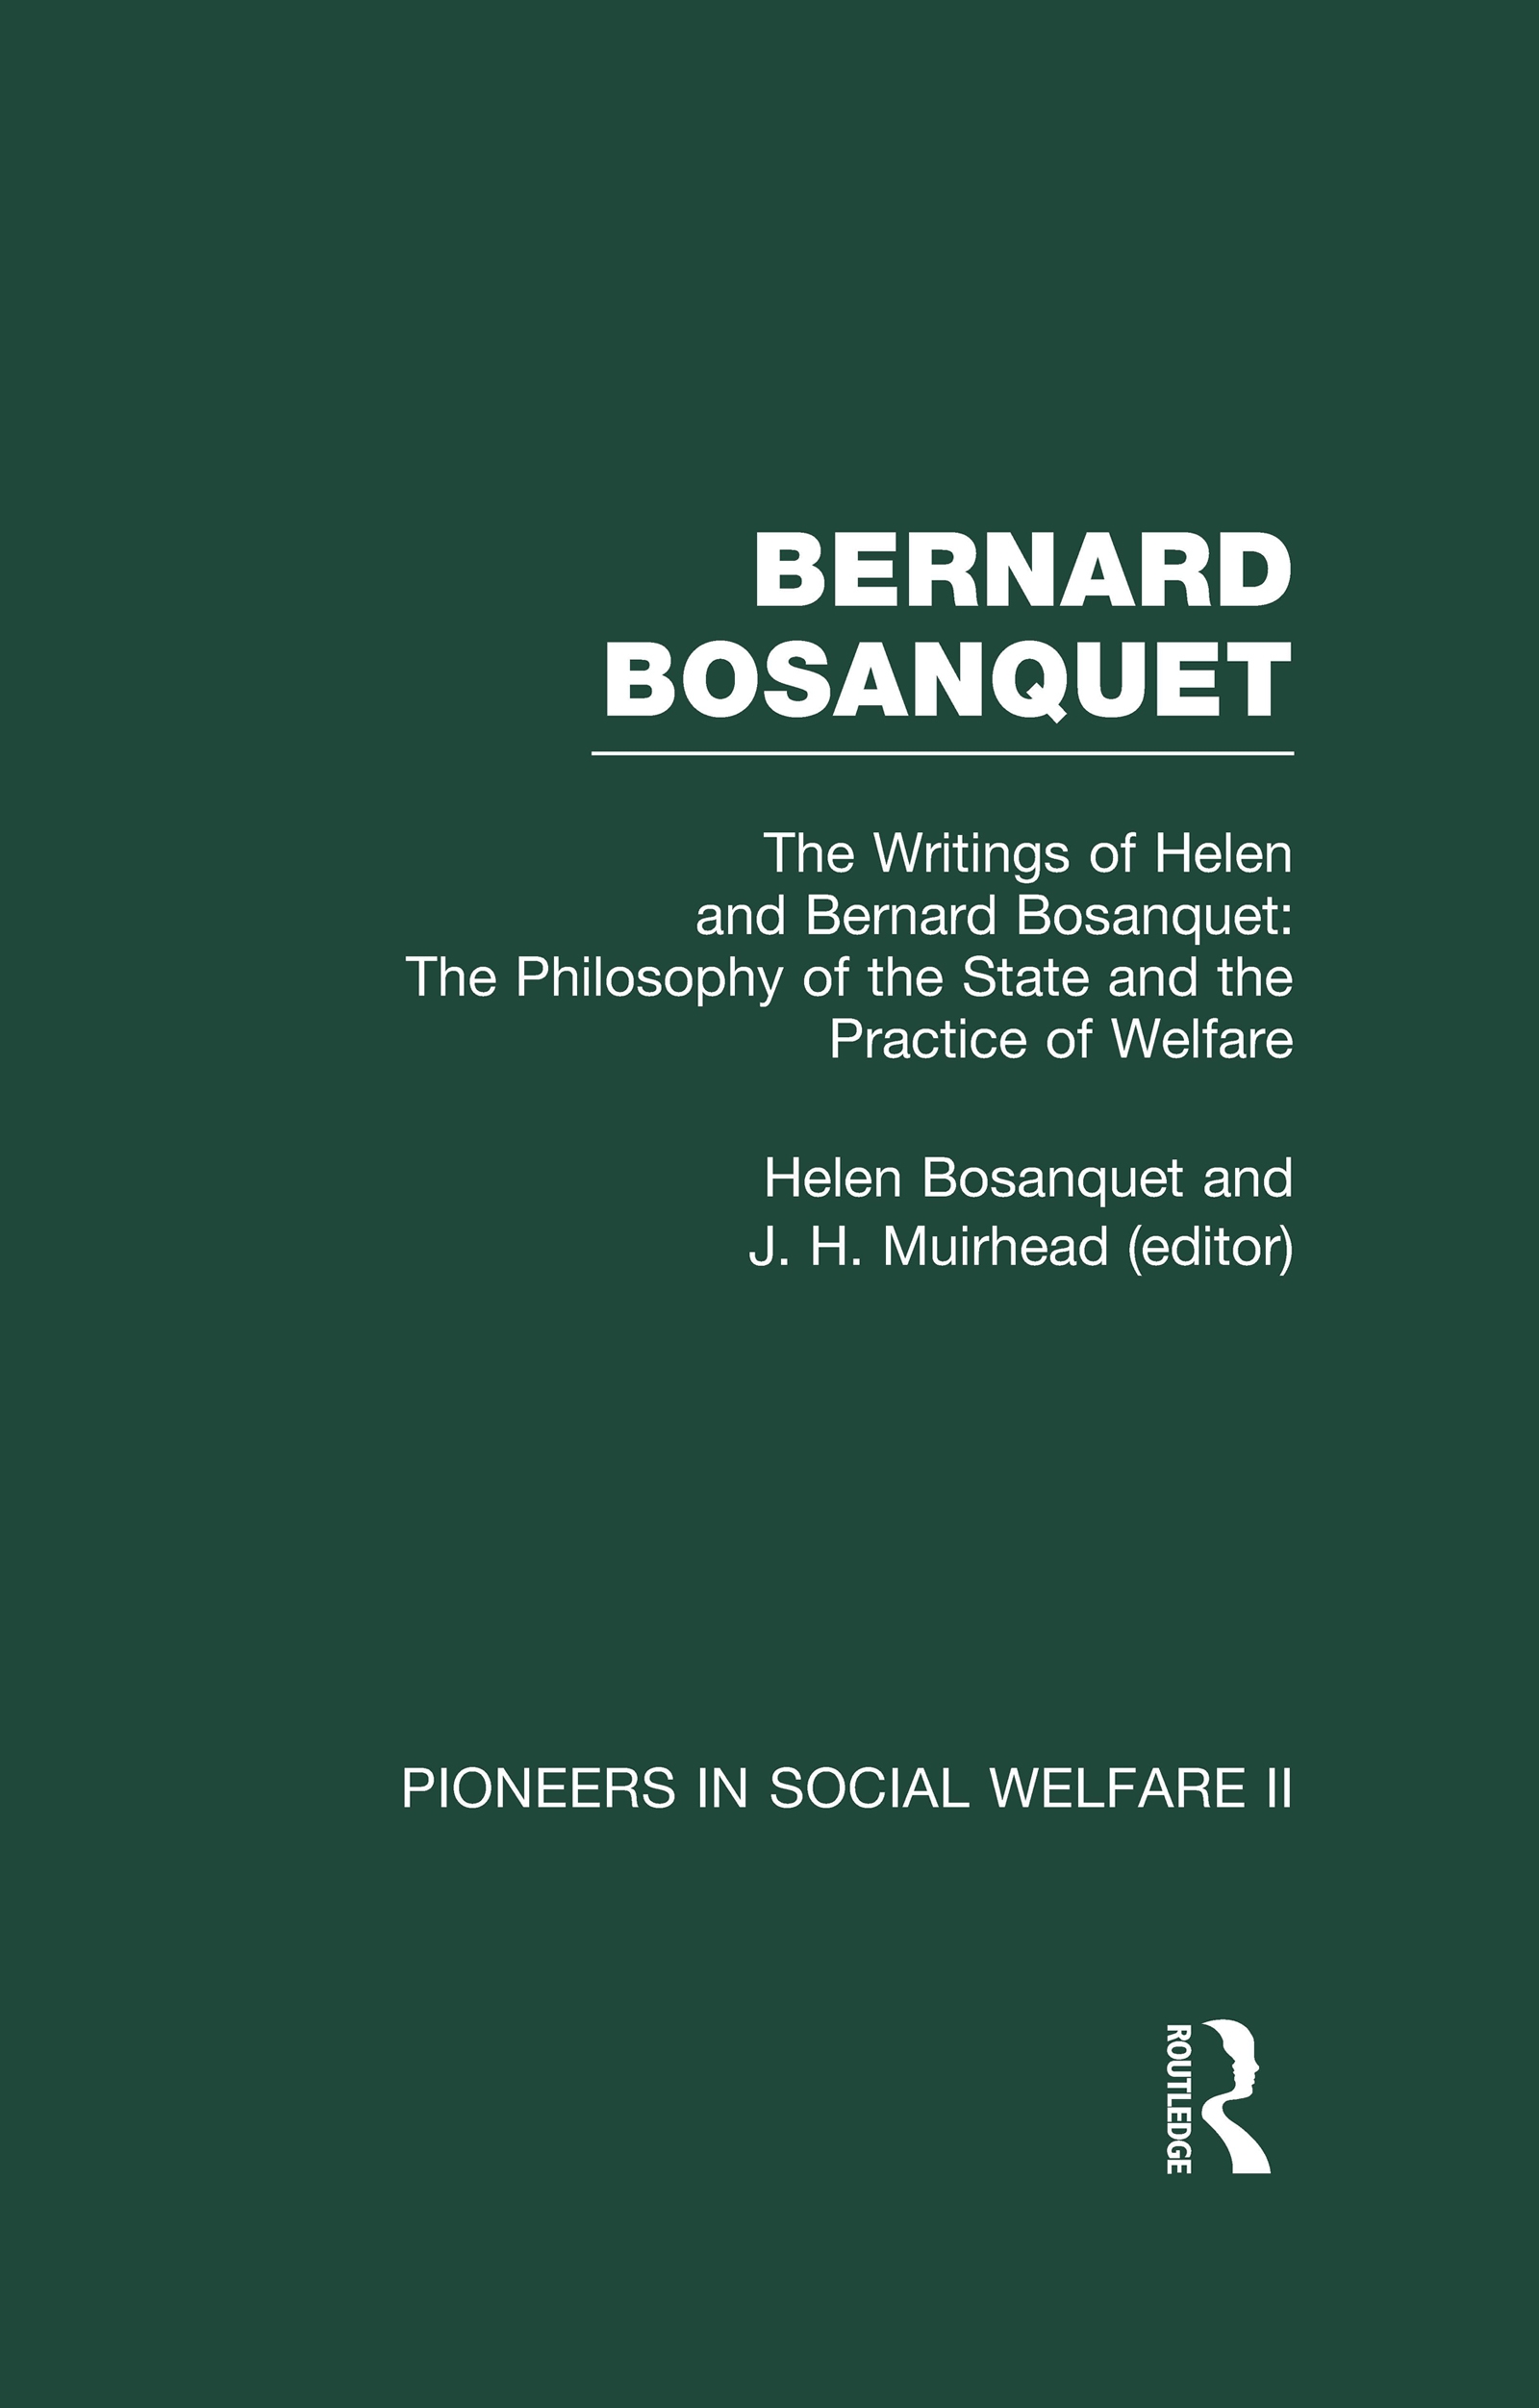 The Philosophy of the State and the Practice of Welfare: The Writings of Bernard and Helen Bosanquet